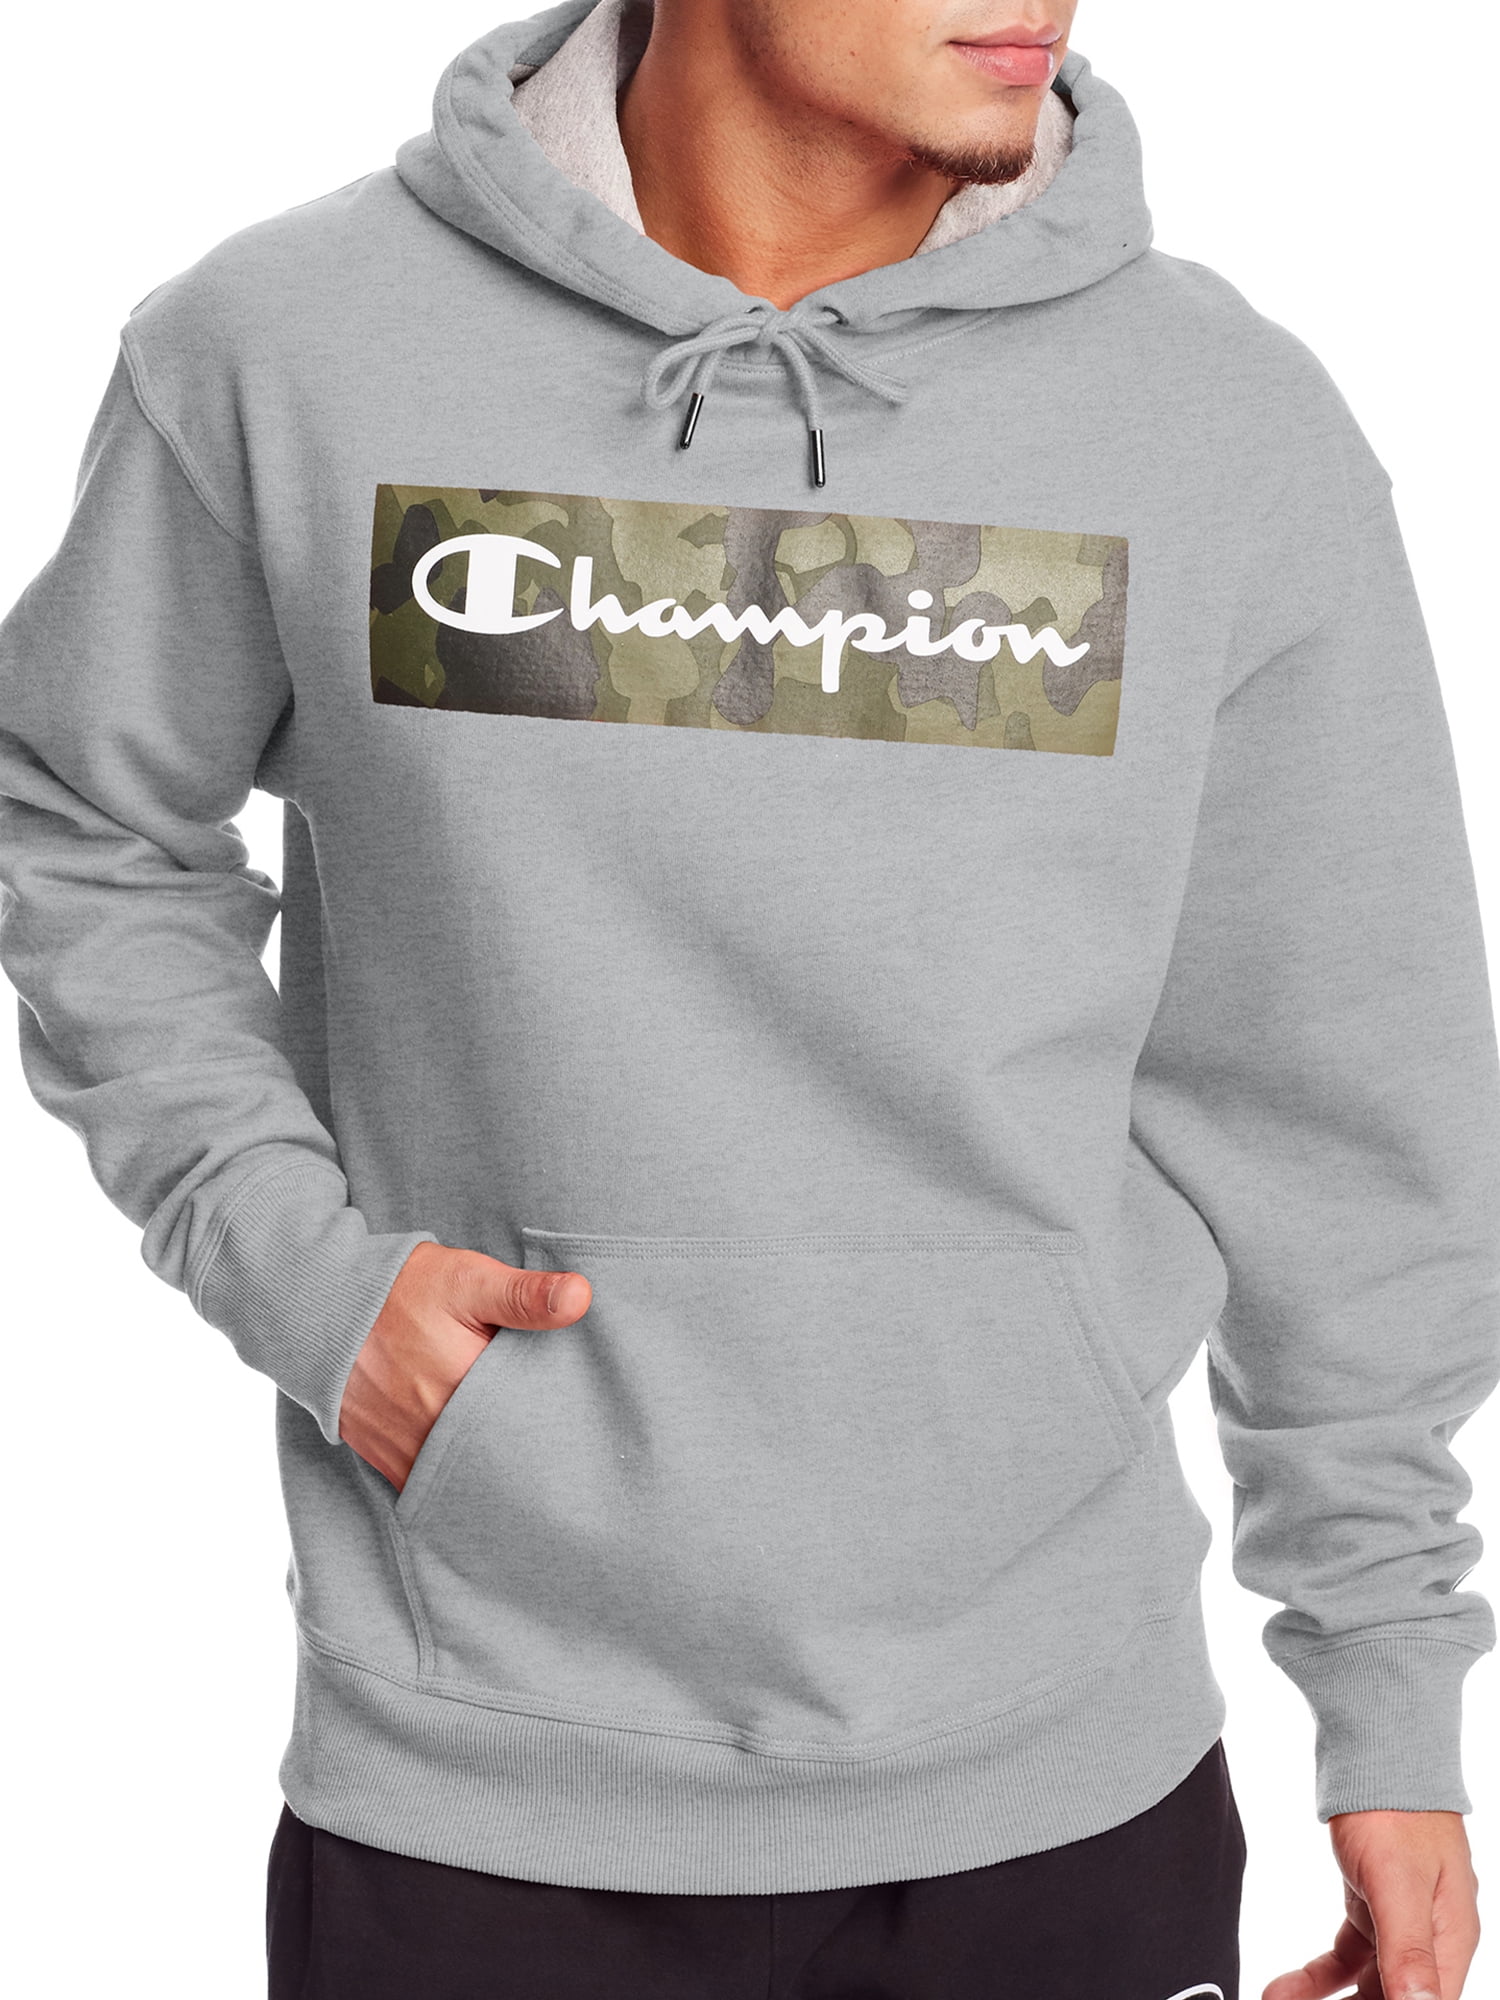 Champion Powerblend Camo Pullover Hoodie, up to Size - Walmart.com